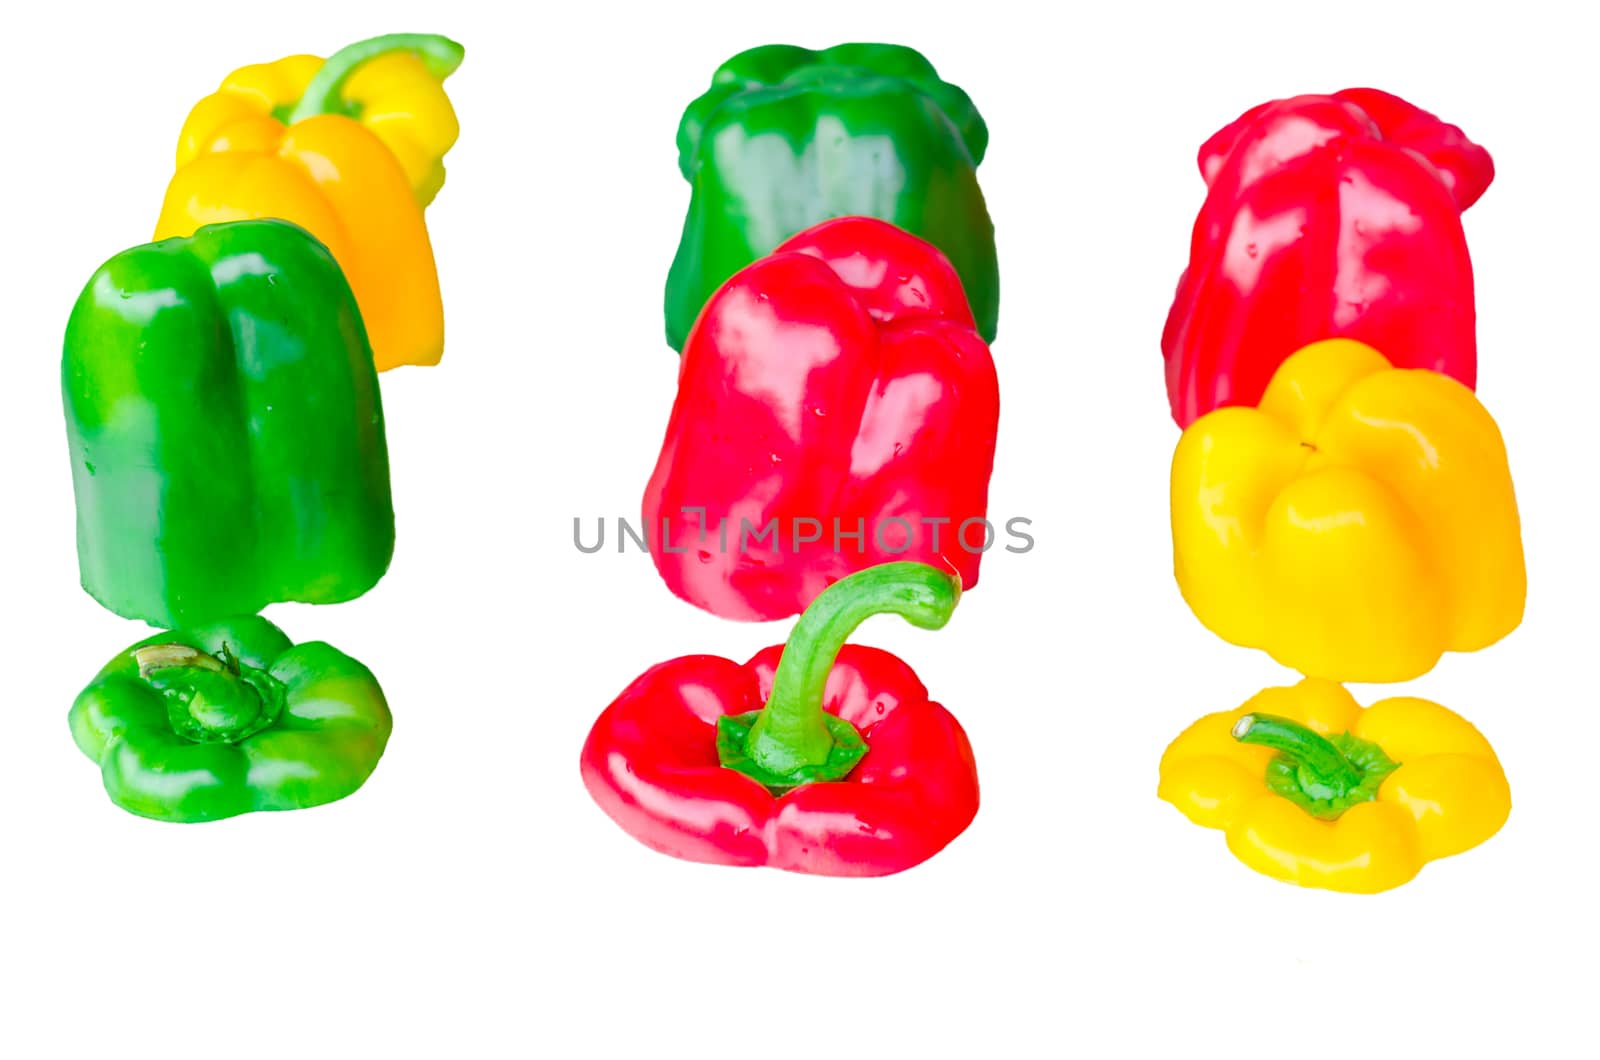 Yellow, Red, Green pepper sliced isolated against white background.